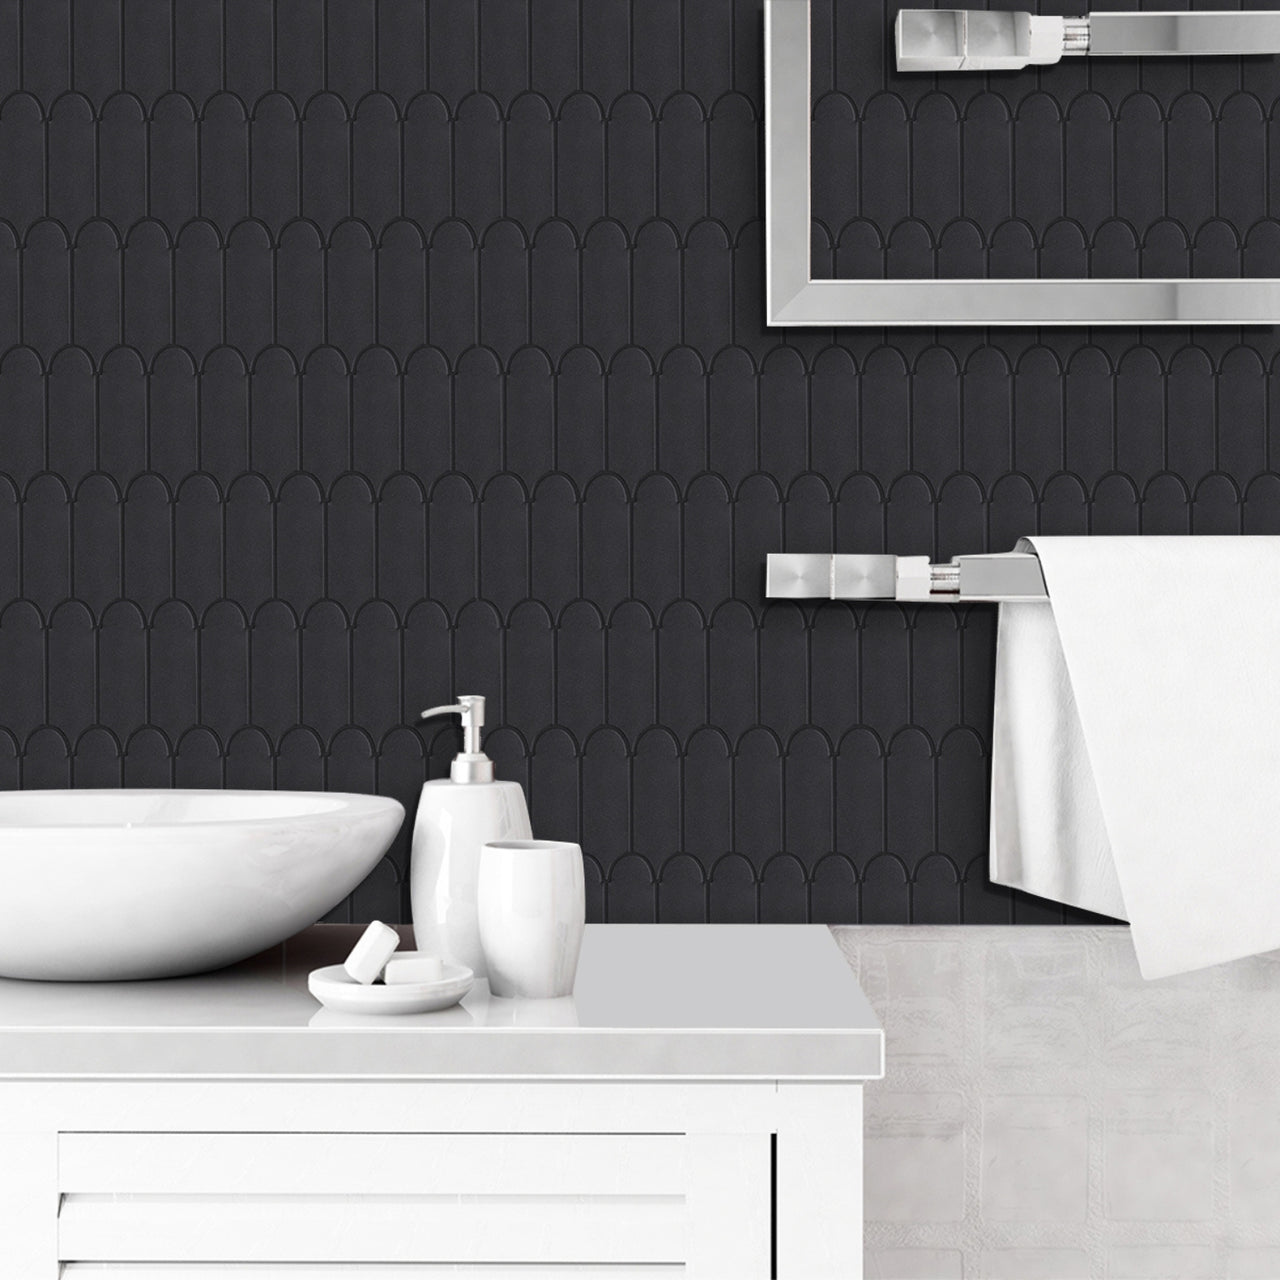 Feather black matte wall tiles with black grout on wall in bathroom